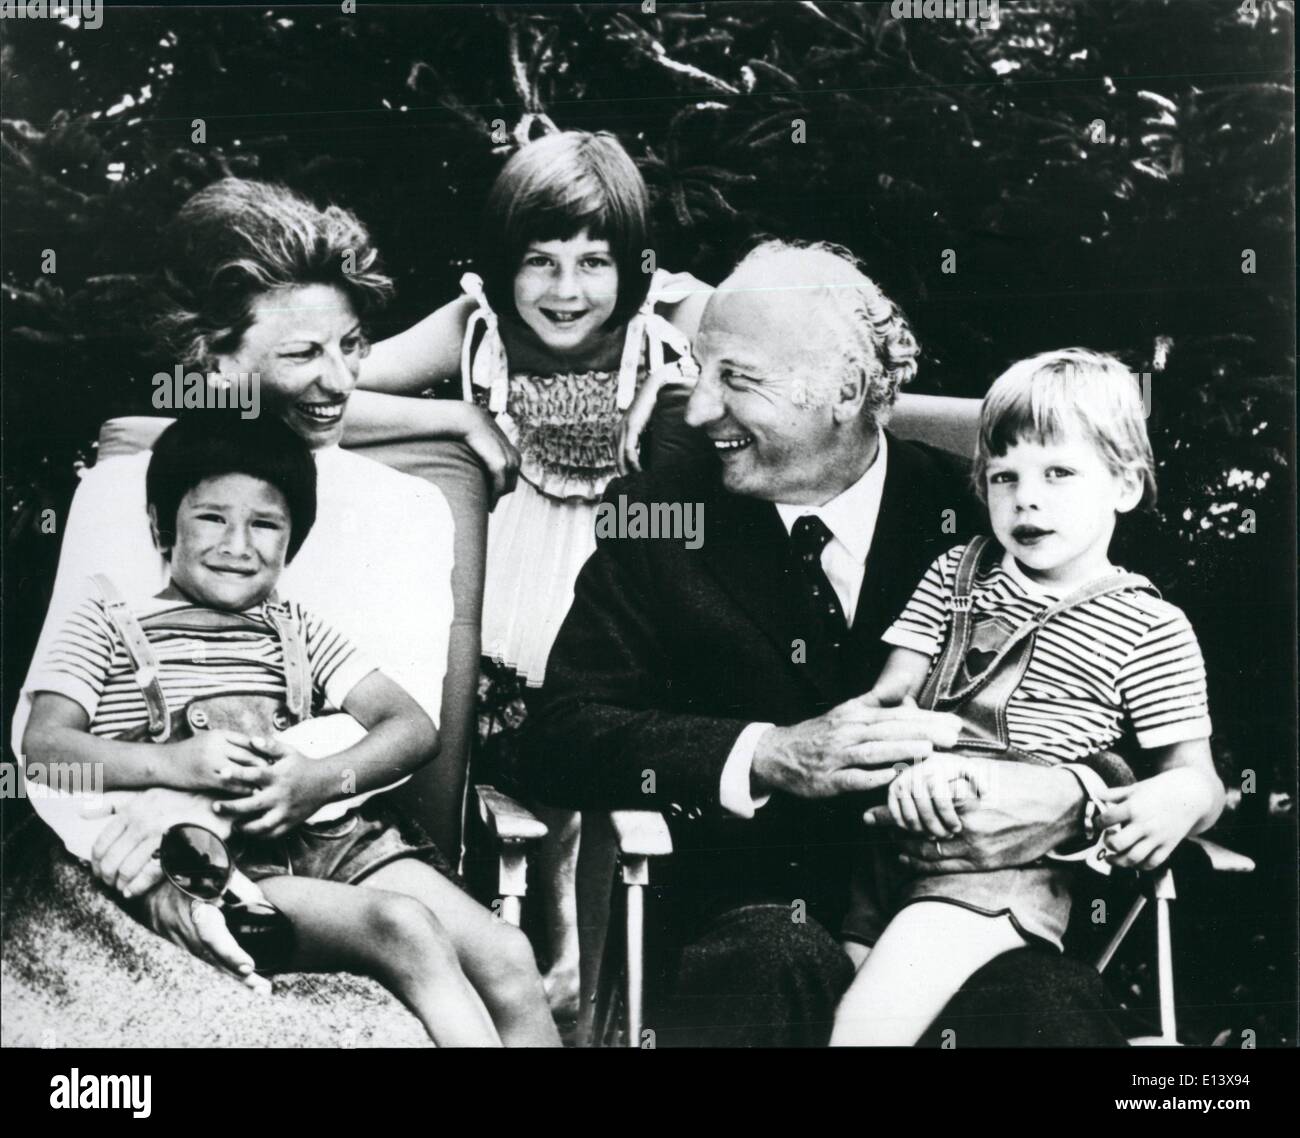 Mar. 27, 2012 - Walter Scheel, President of the Federal Republic of Germany and his family. Stock Photo